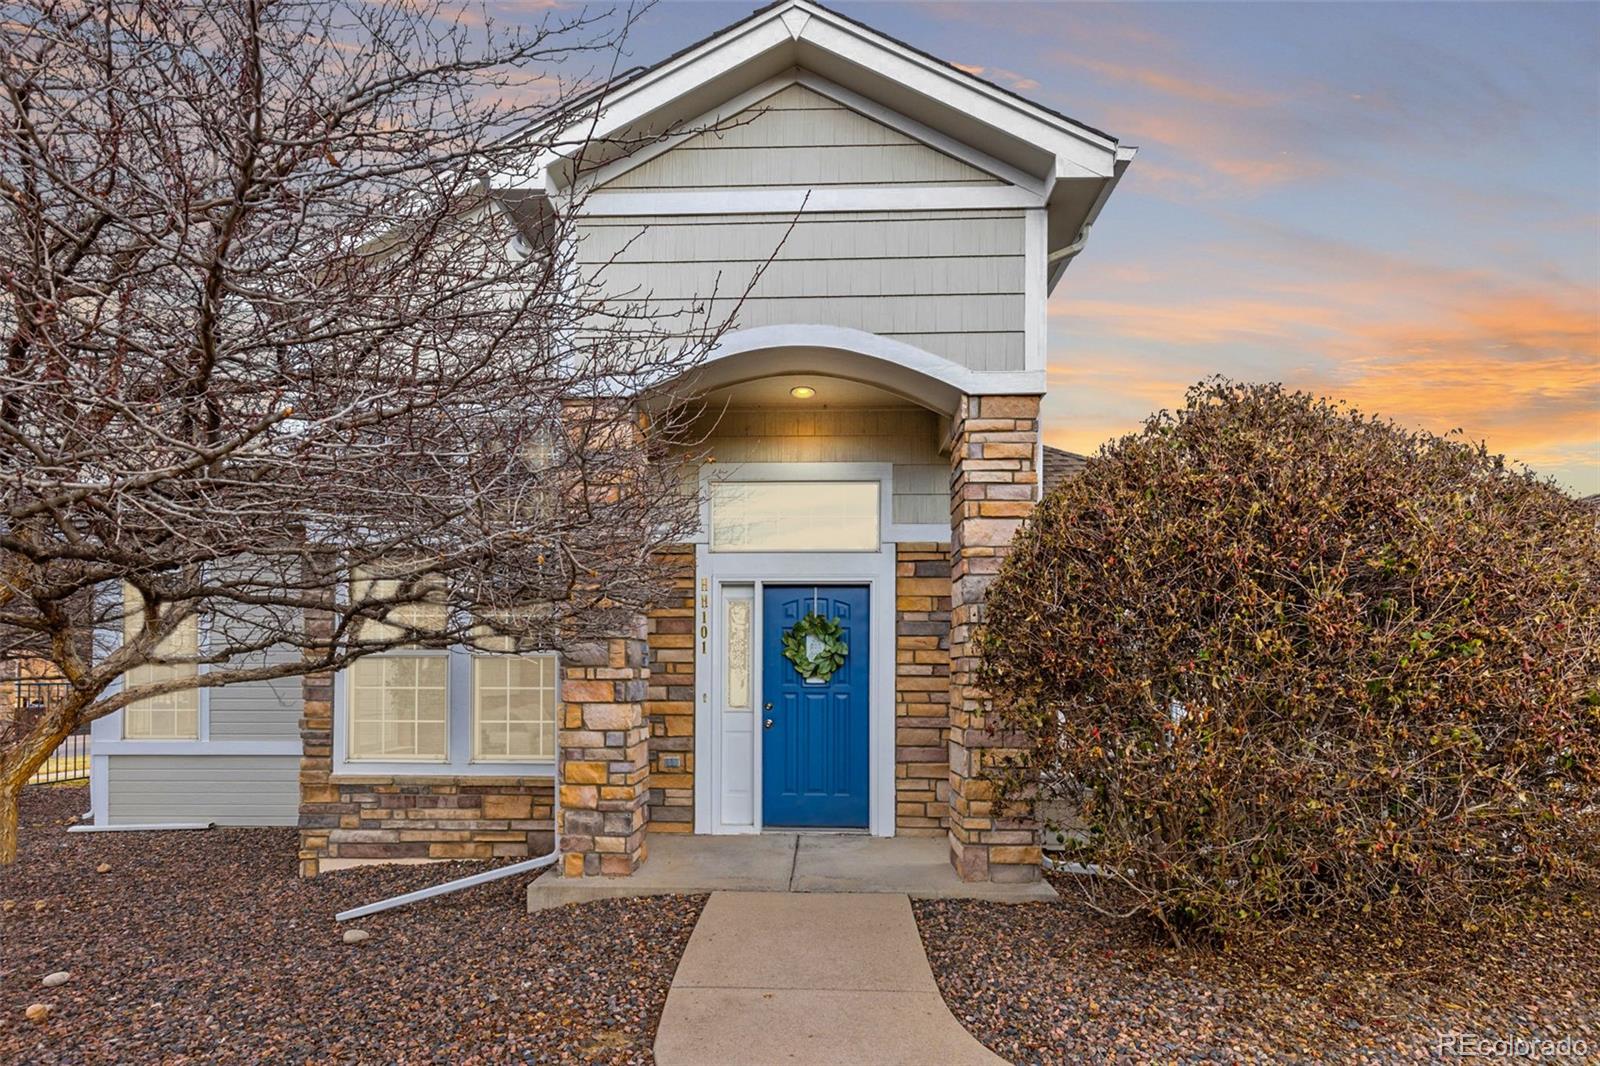 8300  fairmount drive, Denver sold home. Closed on 2024-03-22 for $585,000.